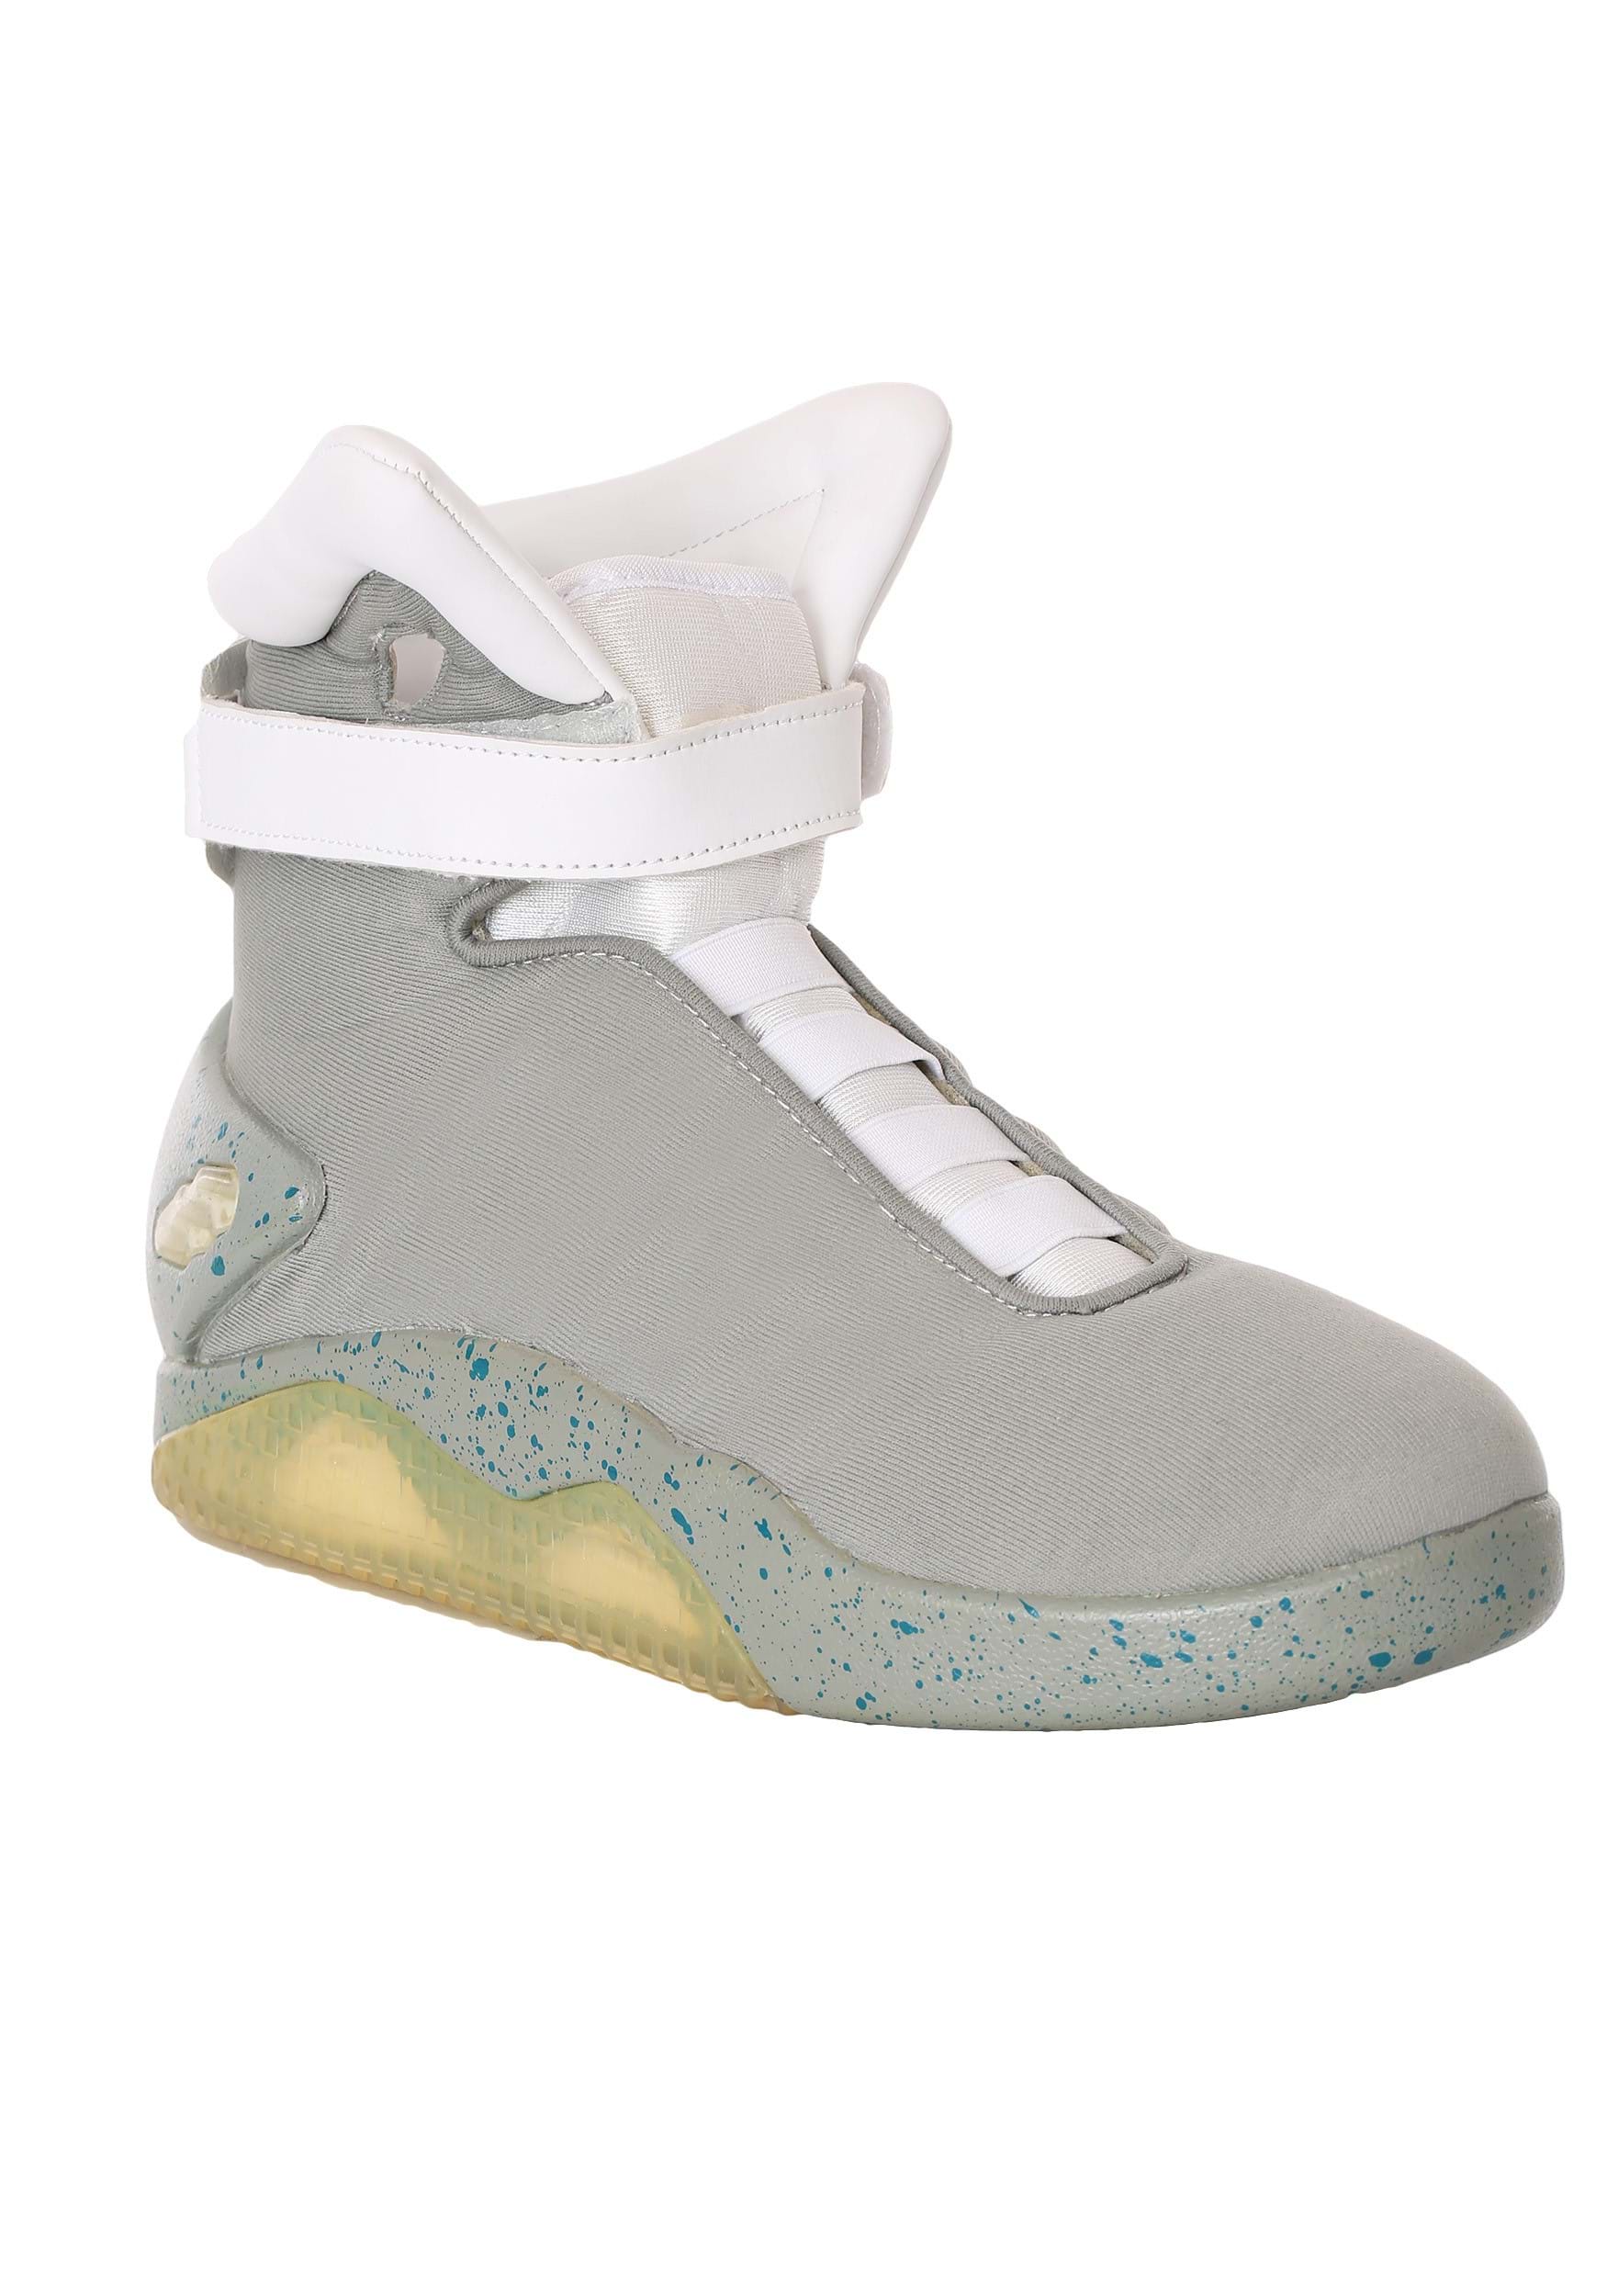 Back To The Future Part II Light Up Shoes , Back To The Future Costumes